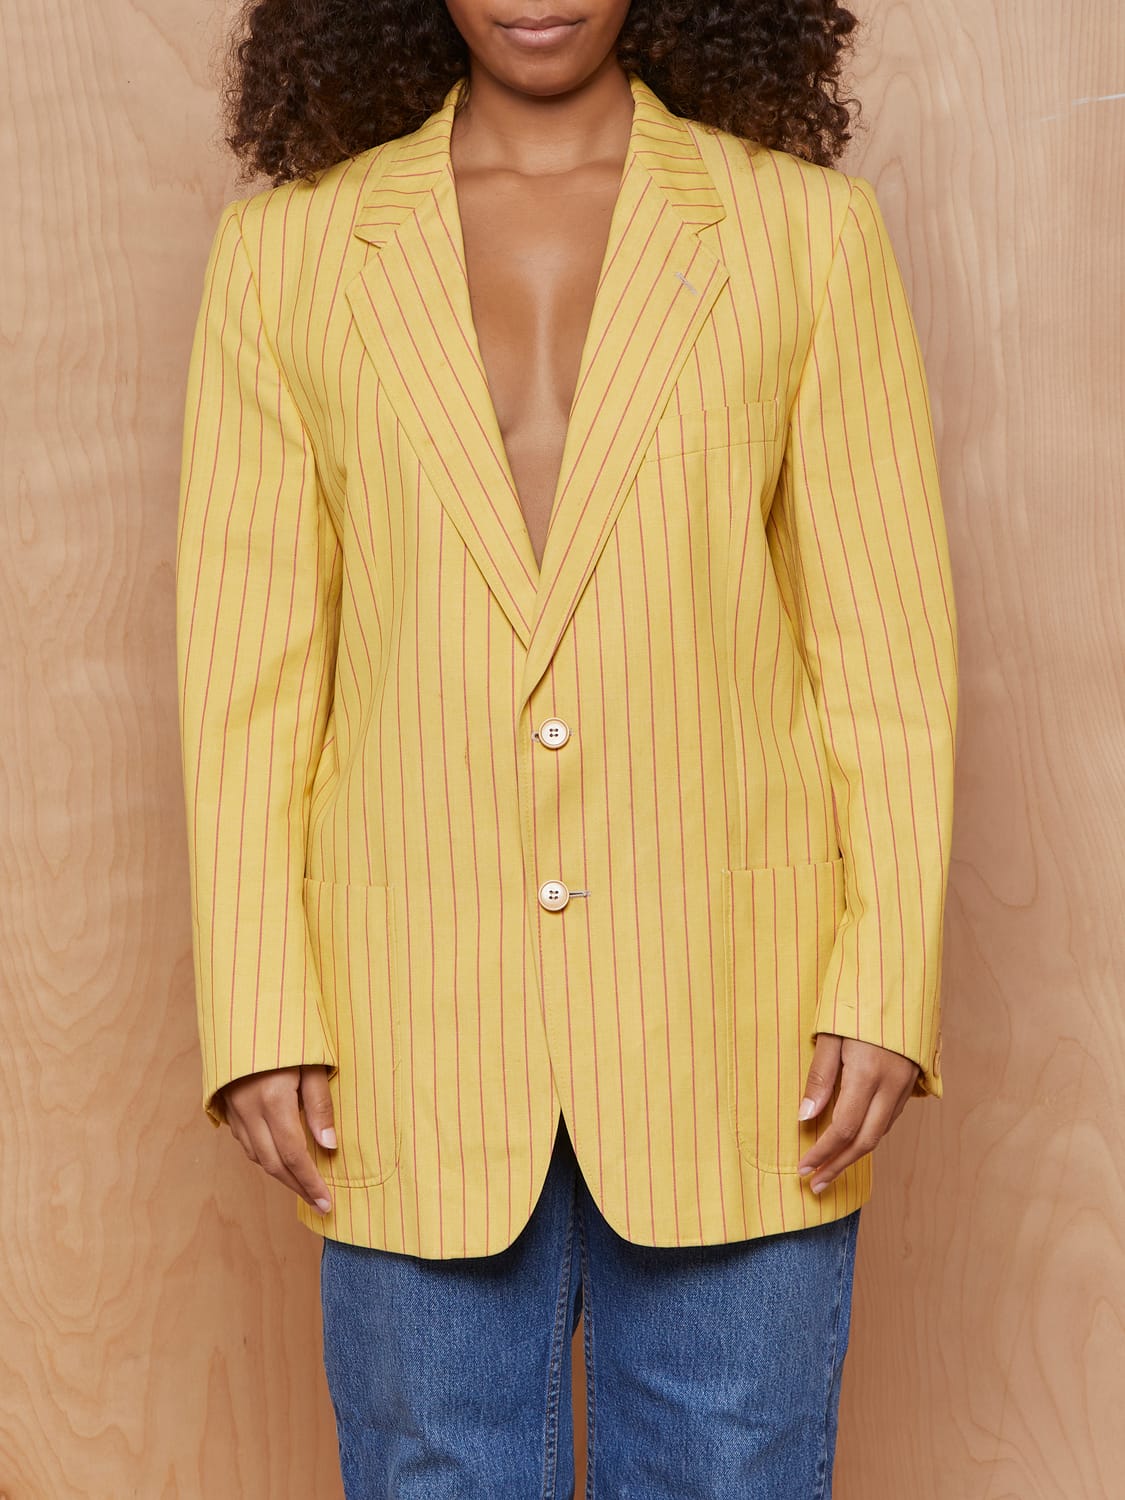 Vintage Yellow and Red Pinstripe Blazer